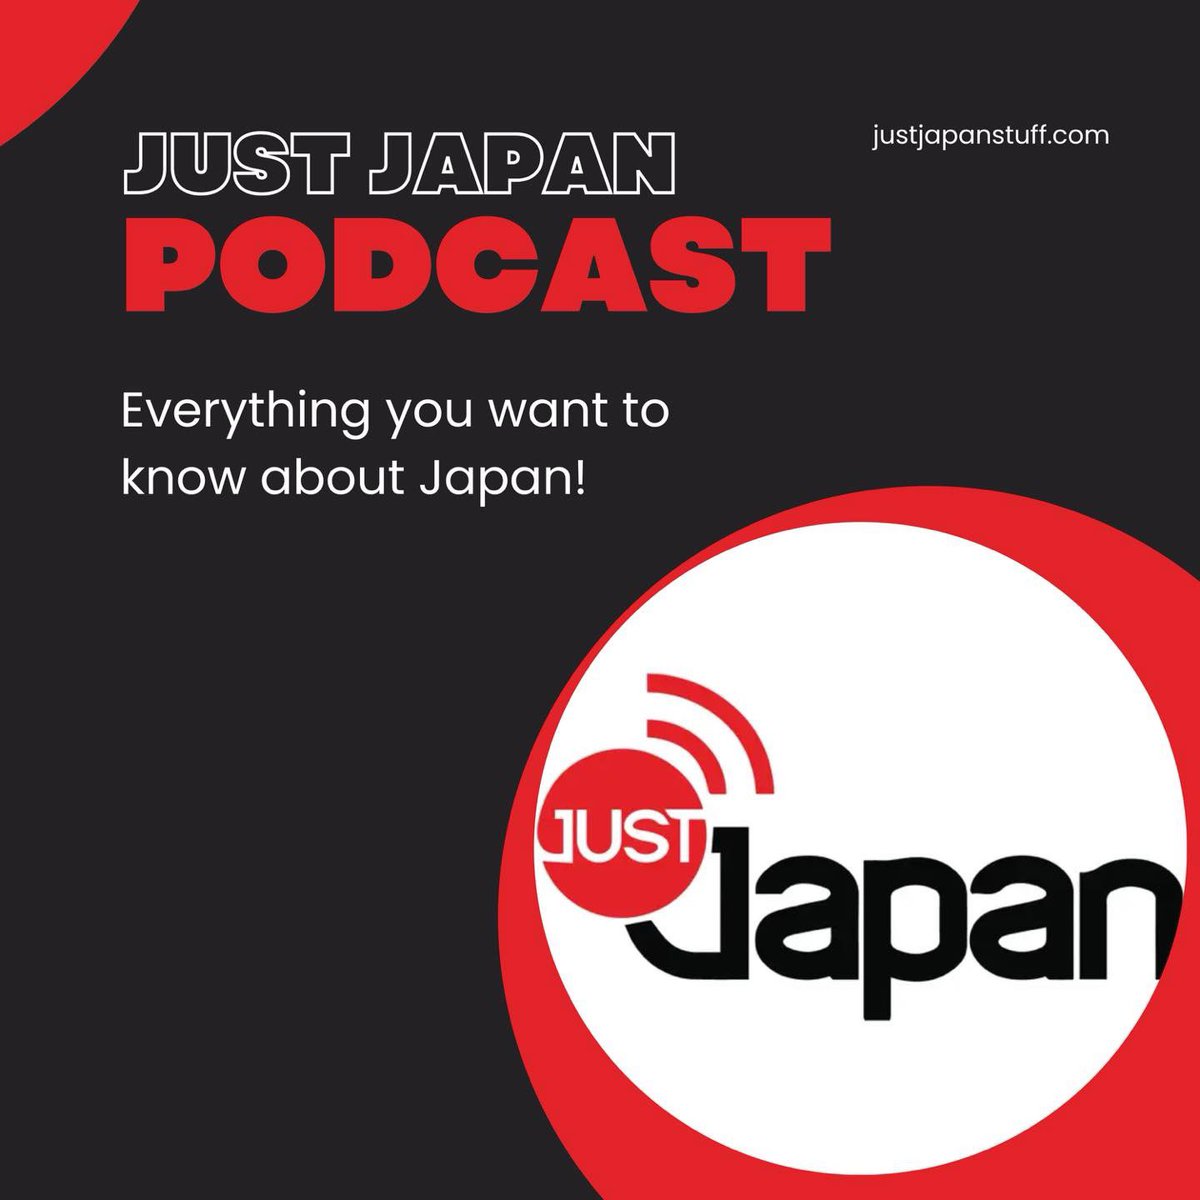 Just Japan Podcast - 207: Live-streaming Japan with @DaveInOsaka @ApplePodcasts: podcasts.apple.com/us/podcast/jus… LISTEN TODAY! 🎙️ 🇯🇵 #Japan #livestreaming #travel #podcast